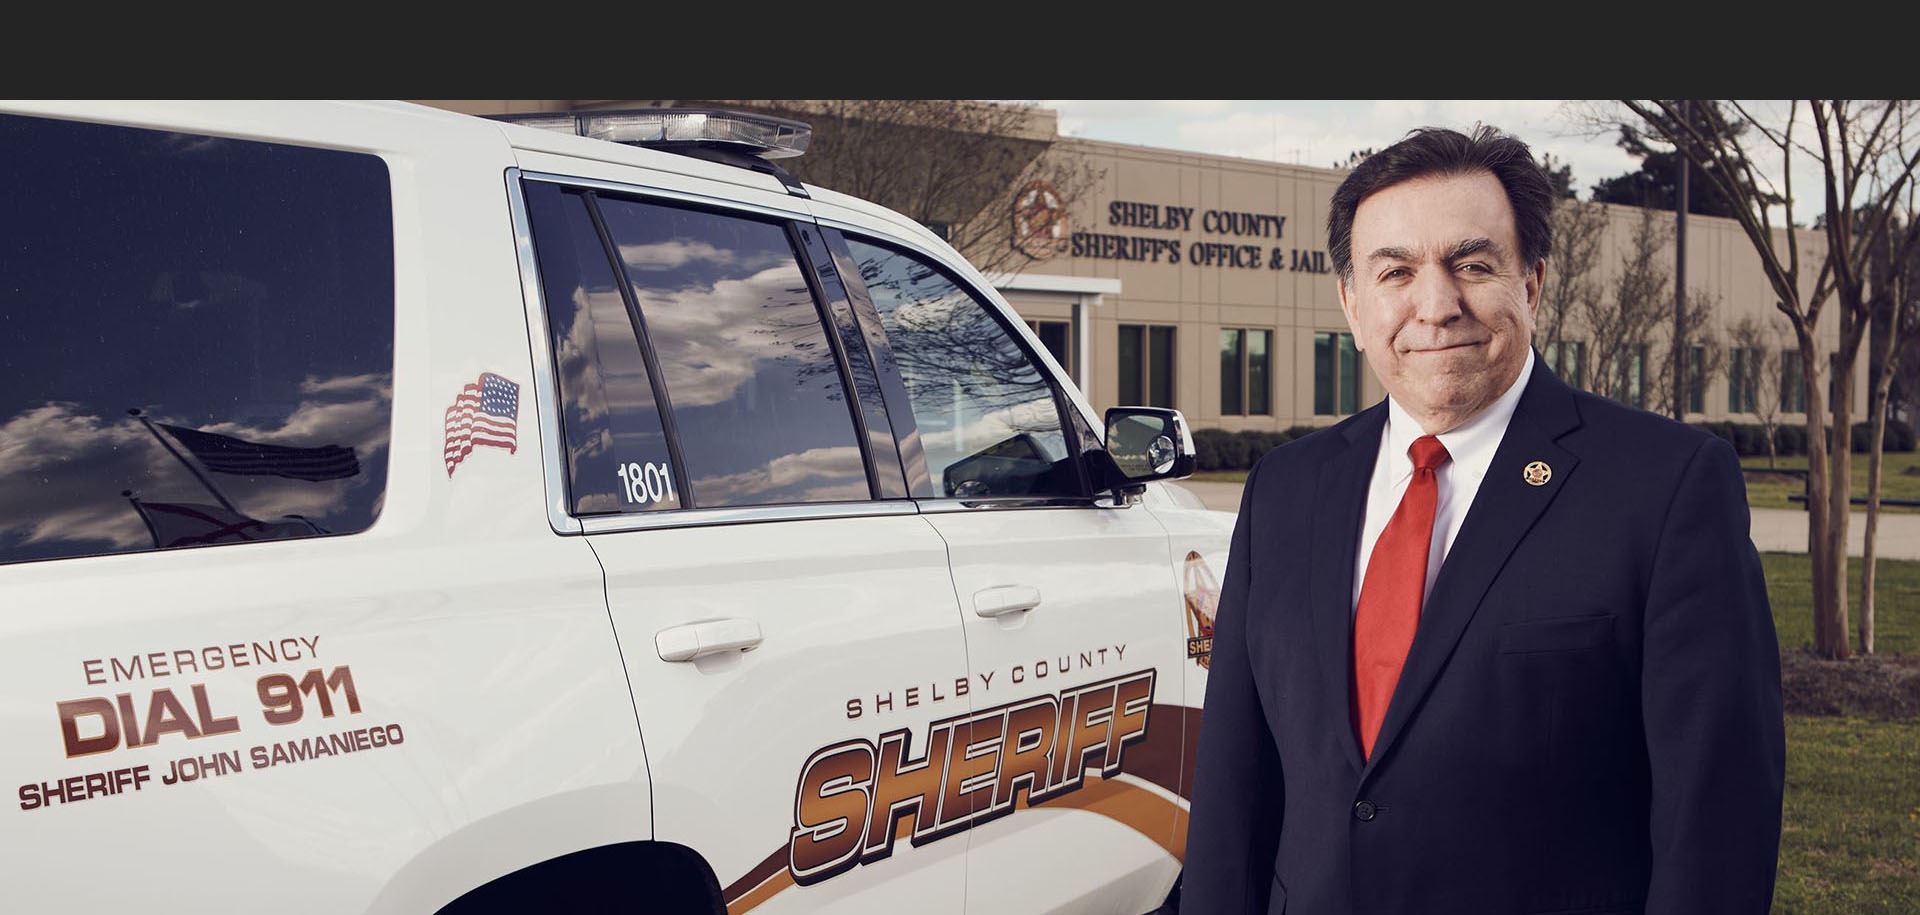 Image of Shelby County Sheriff's Department